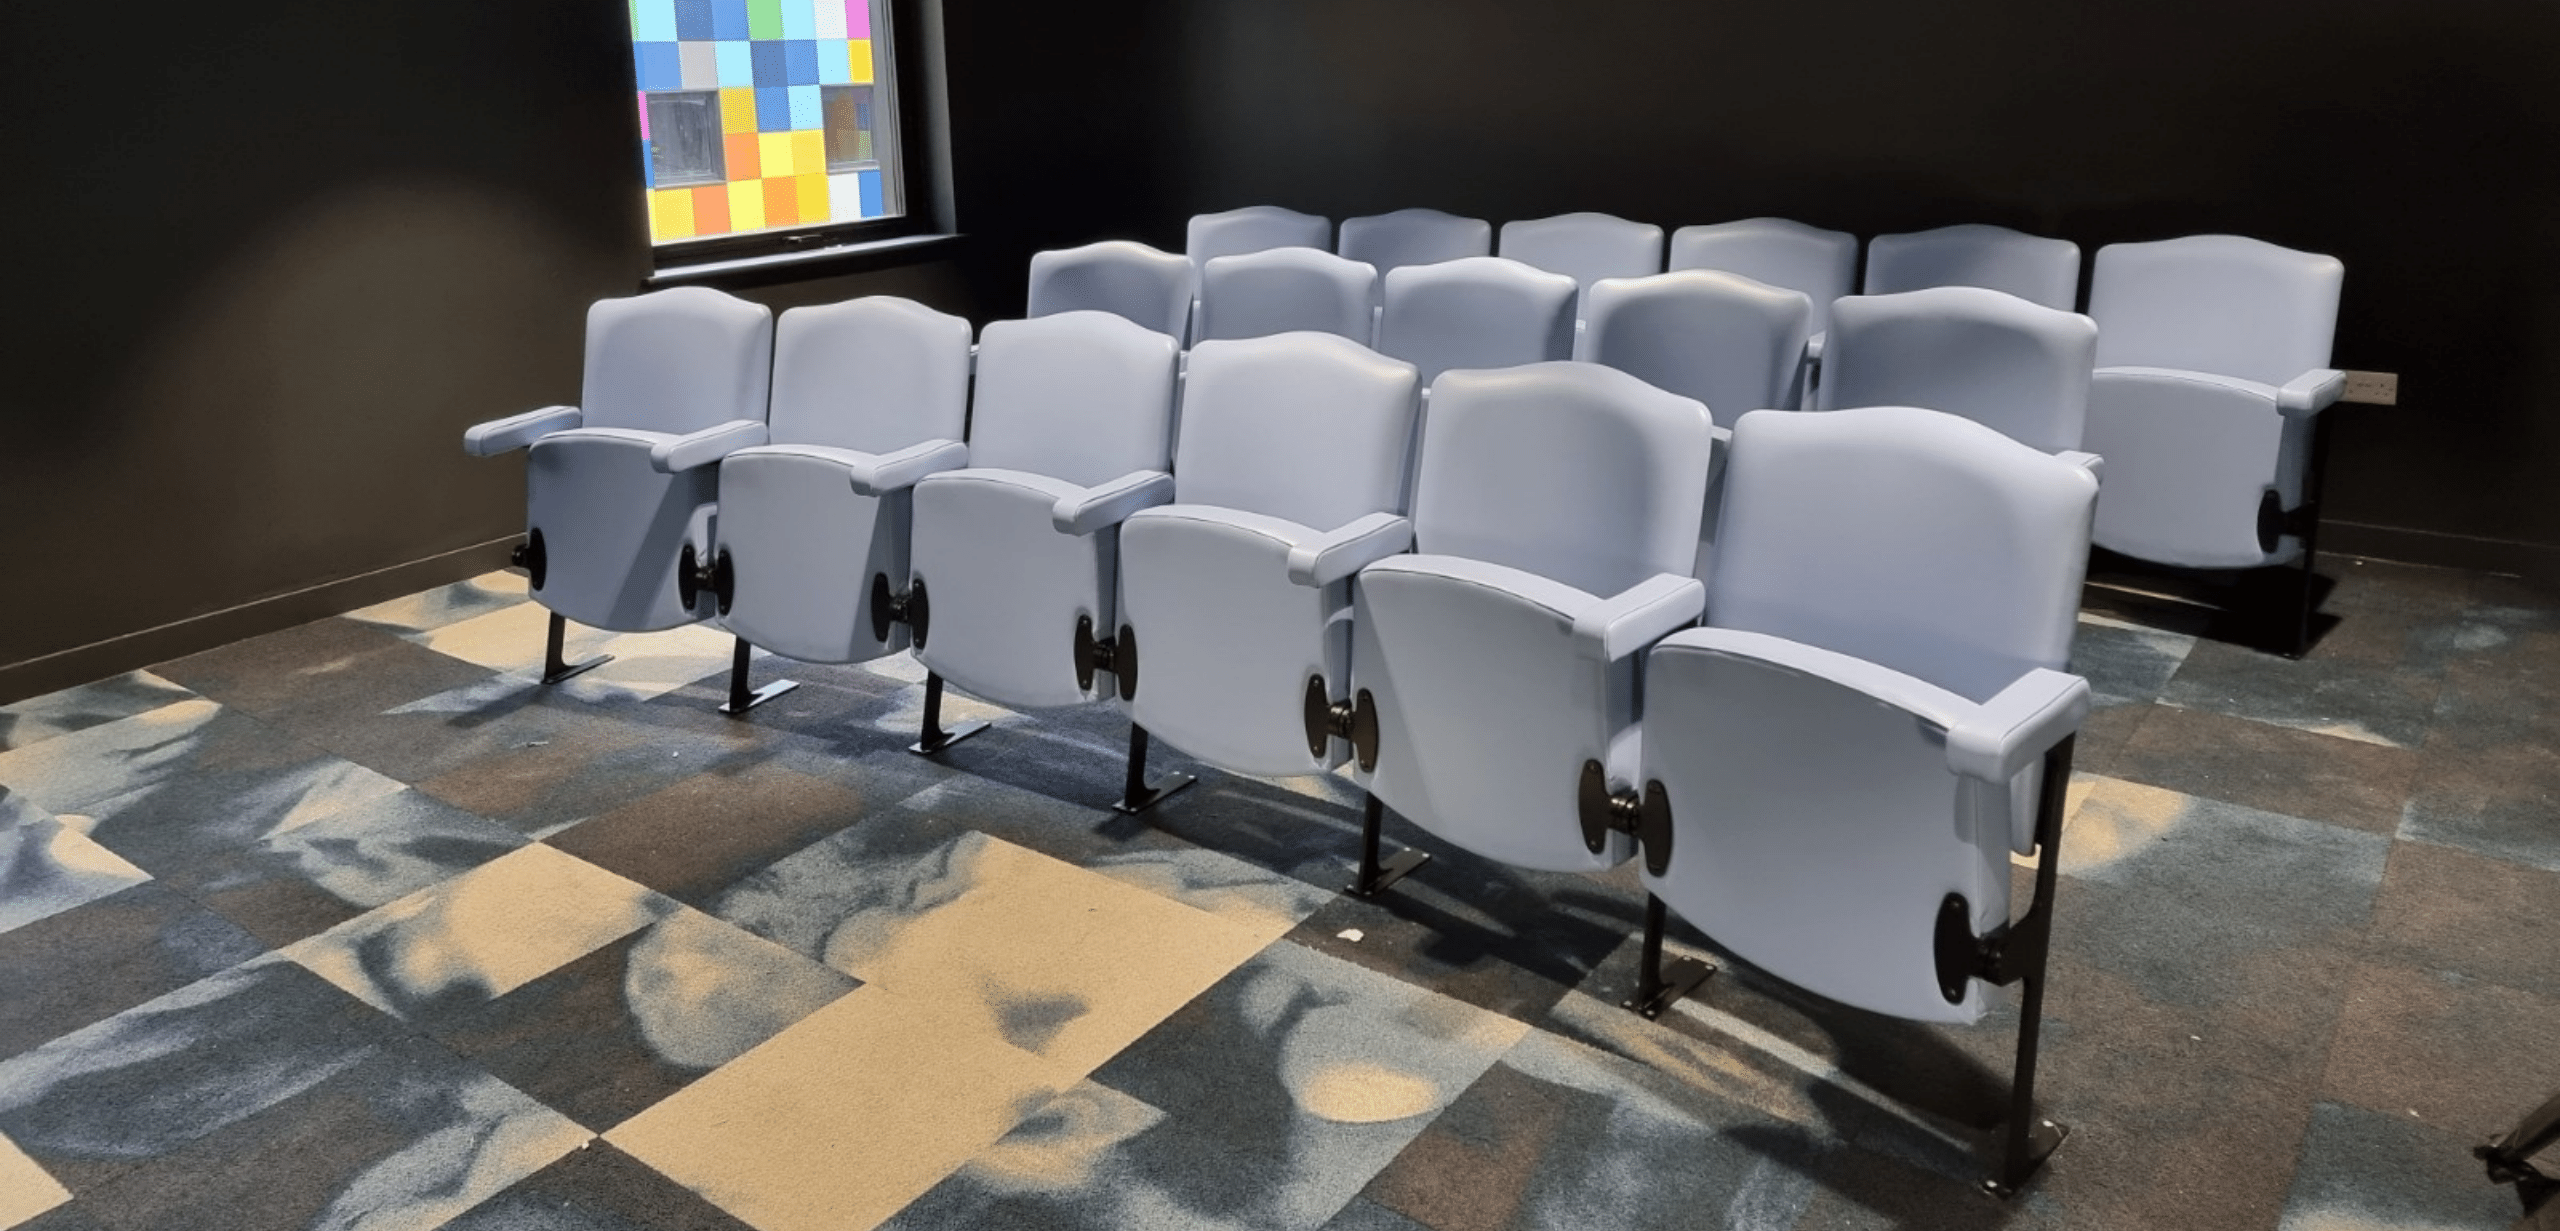 Rows of blue tip up seating in a room.